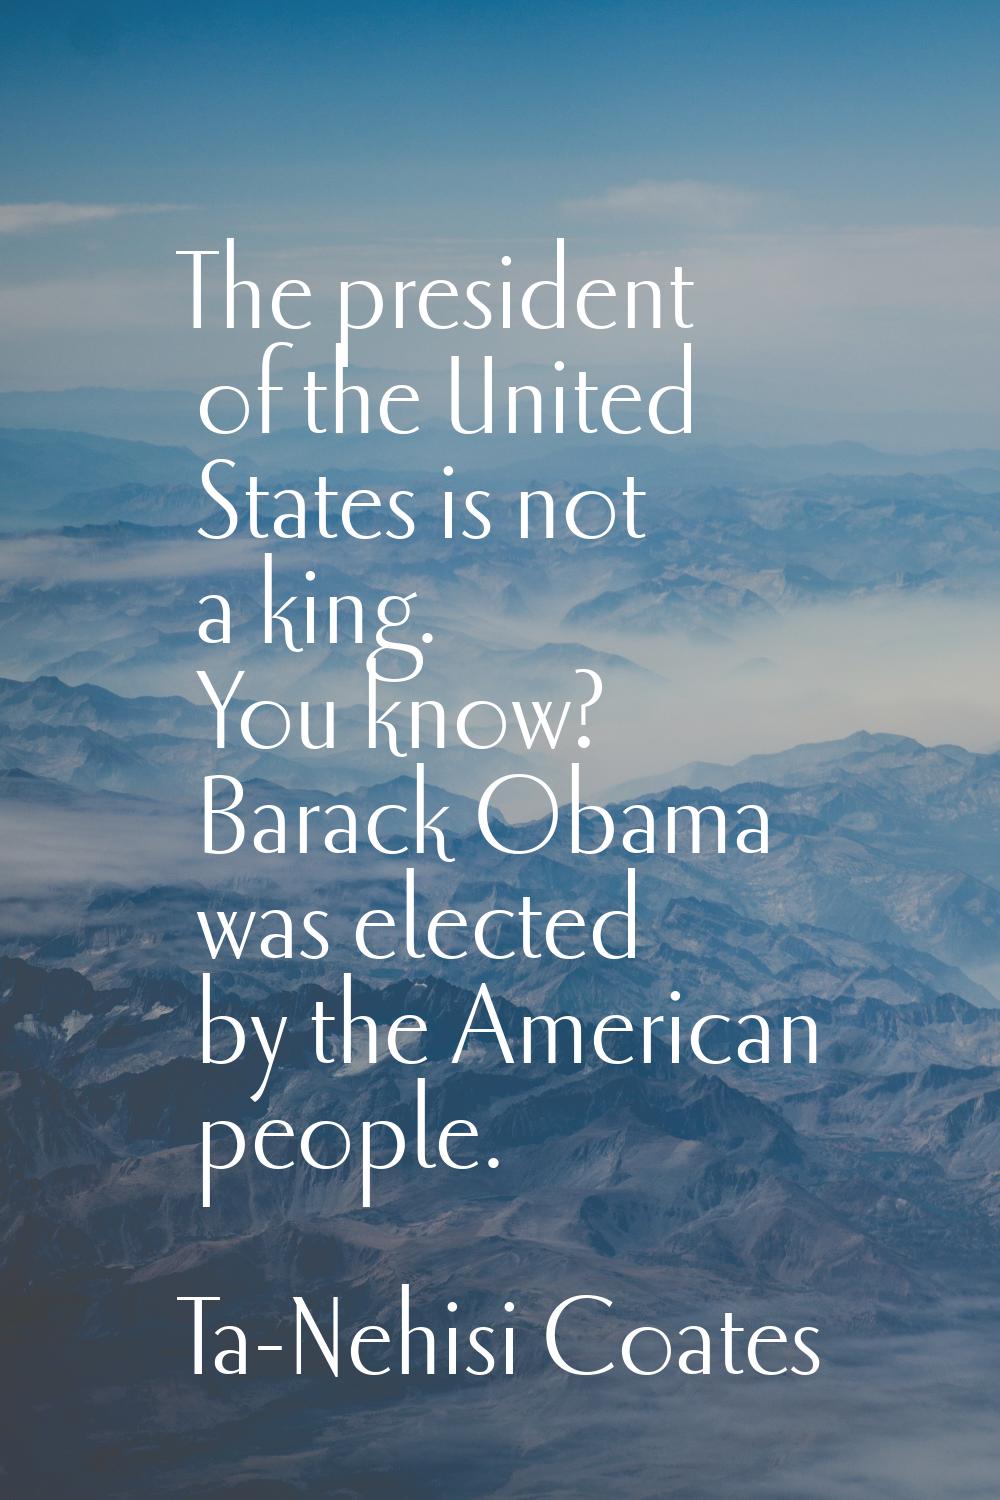 The president of the United States is not a king. You know? Barack Obama was elected by the America